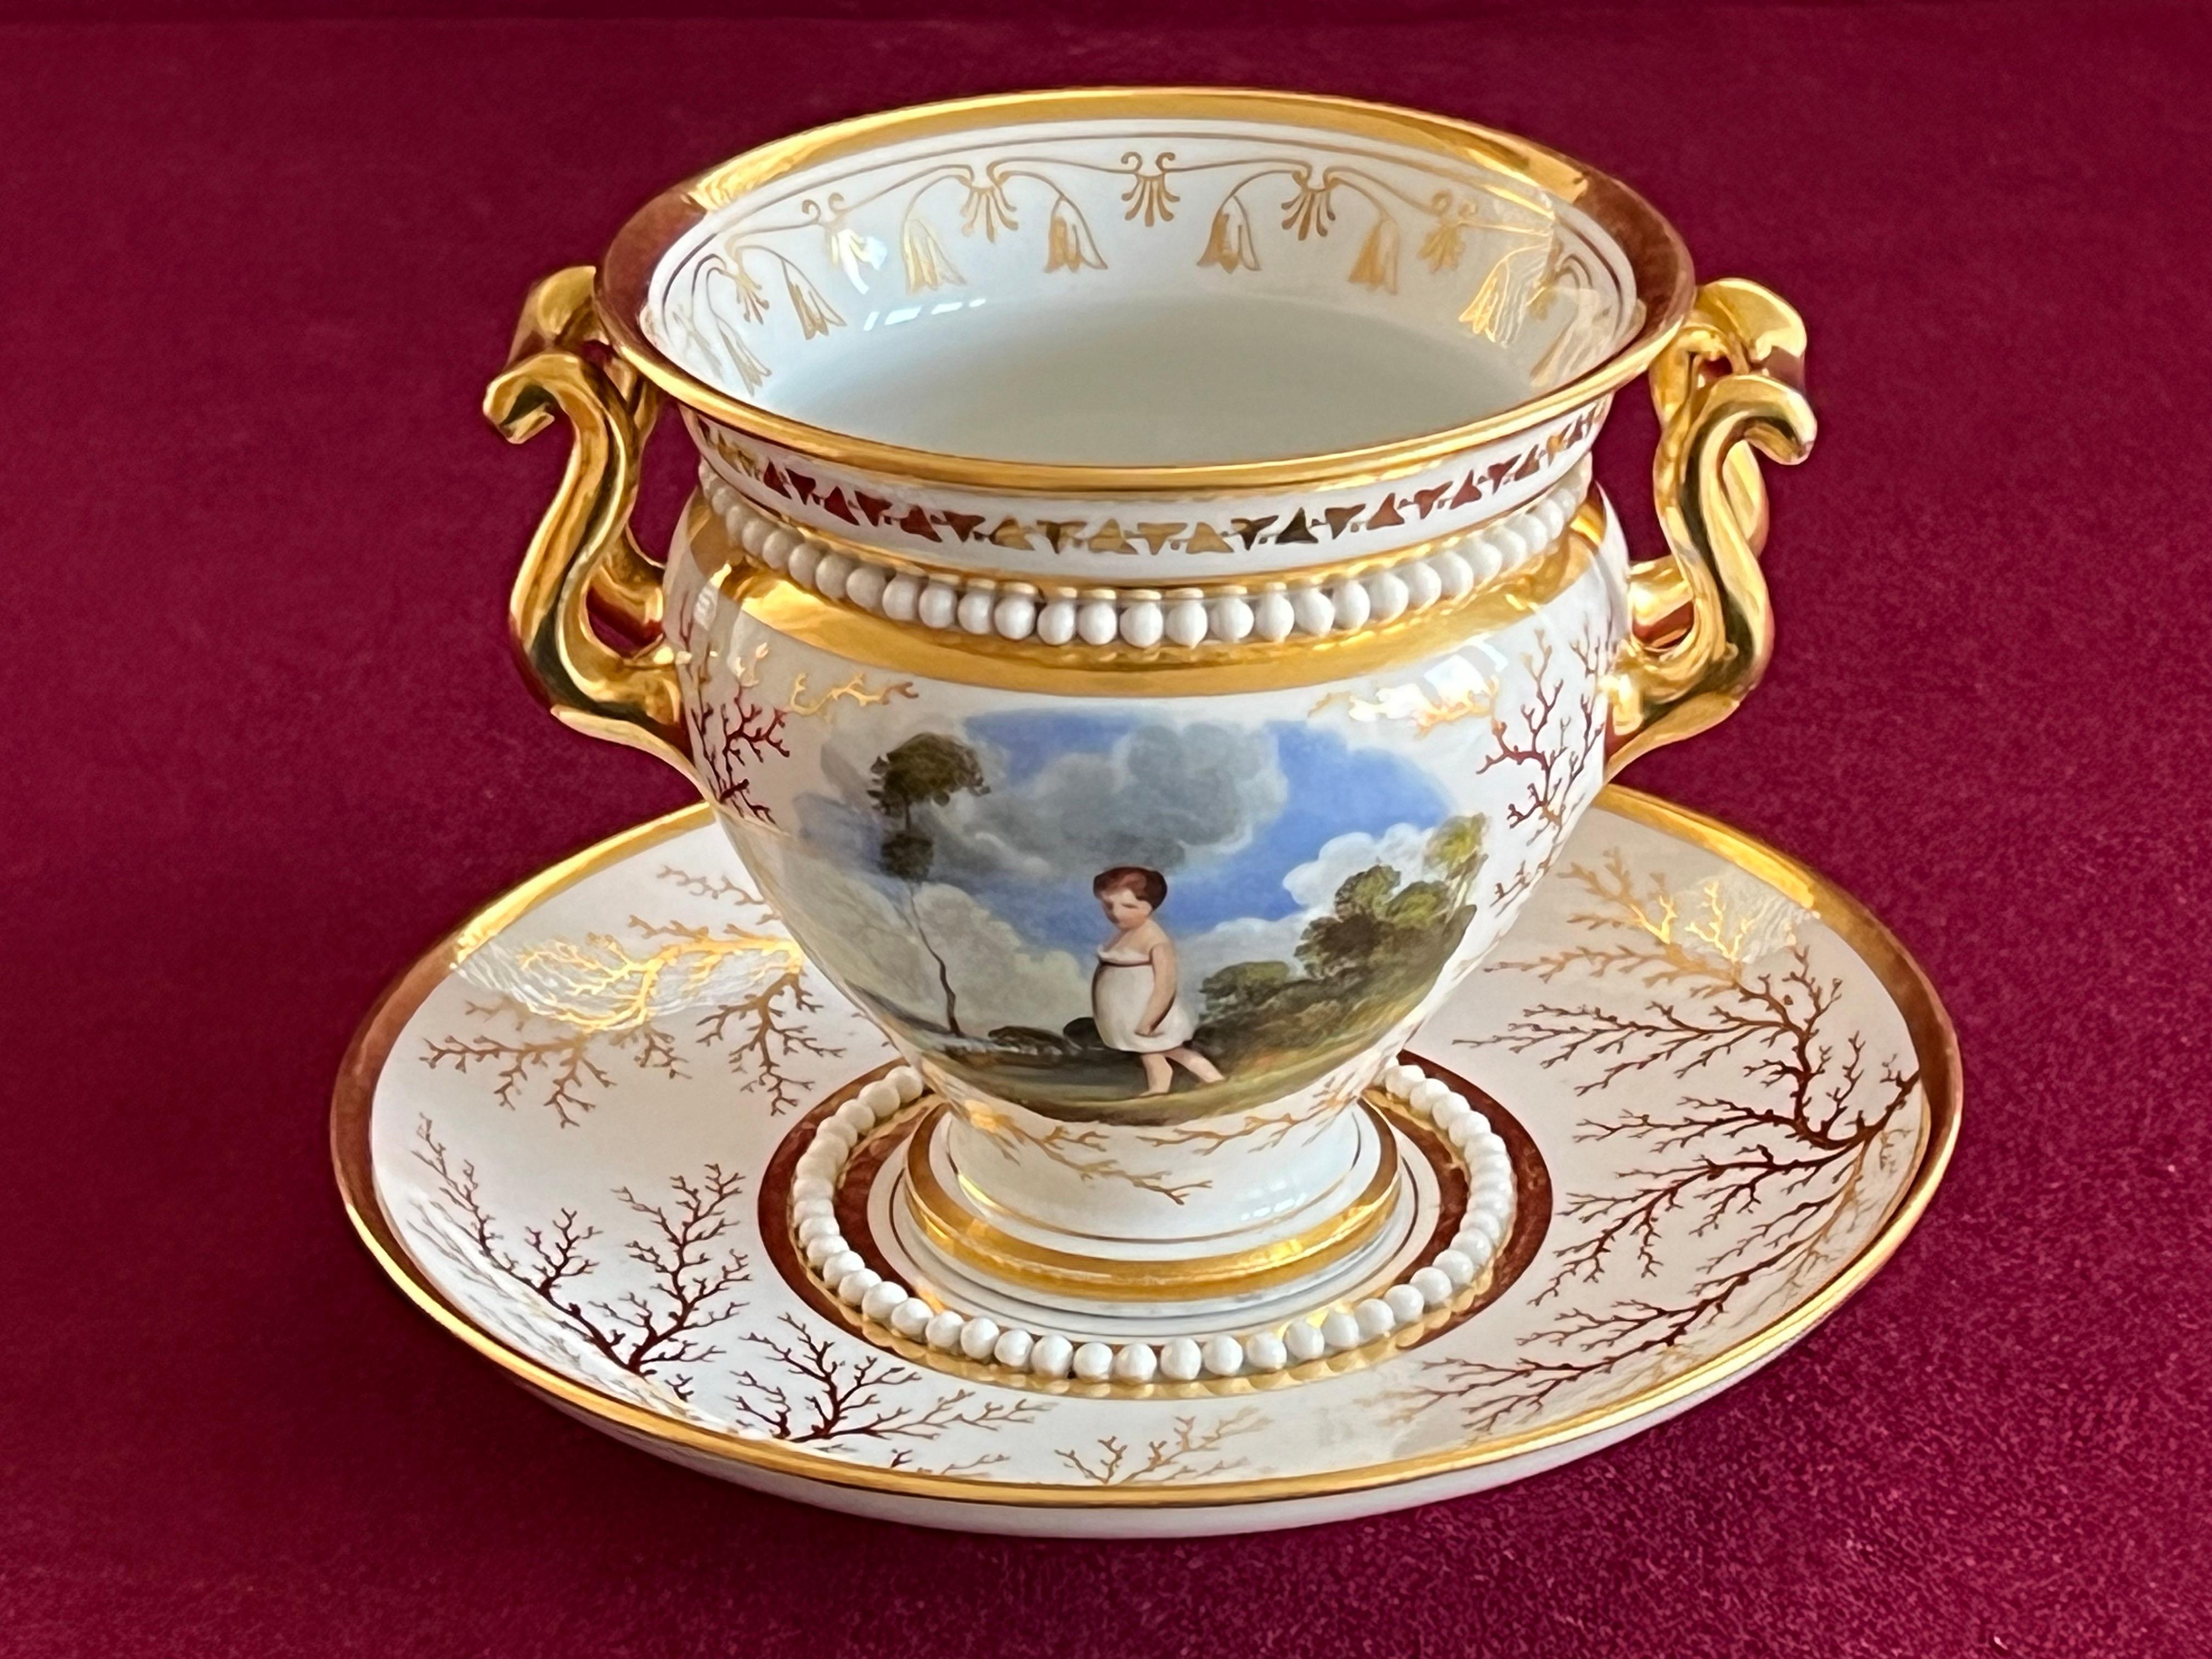 A superb and rare Flight, Barr and Barr Worcester porcelain cabinet cup and stand, c.1815. With twin gilded handles, broad everted rim and a band of white applied pearls below the rim. The front of the cup is finely painted with a scene of ‘The